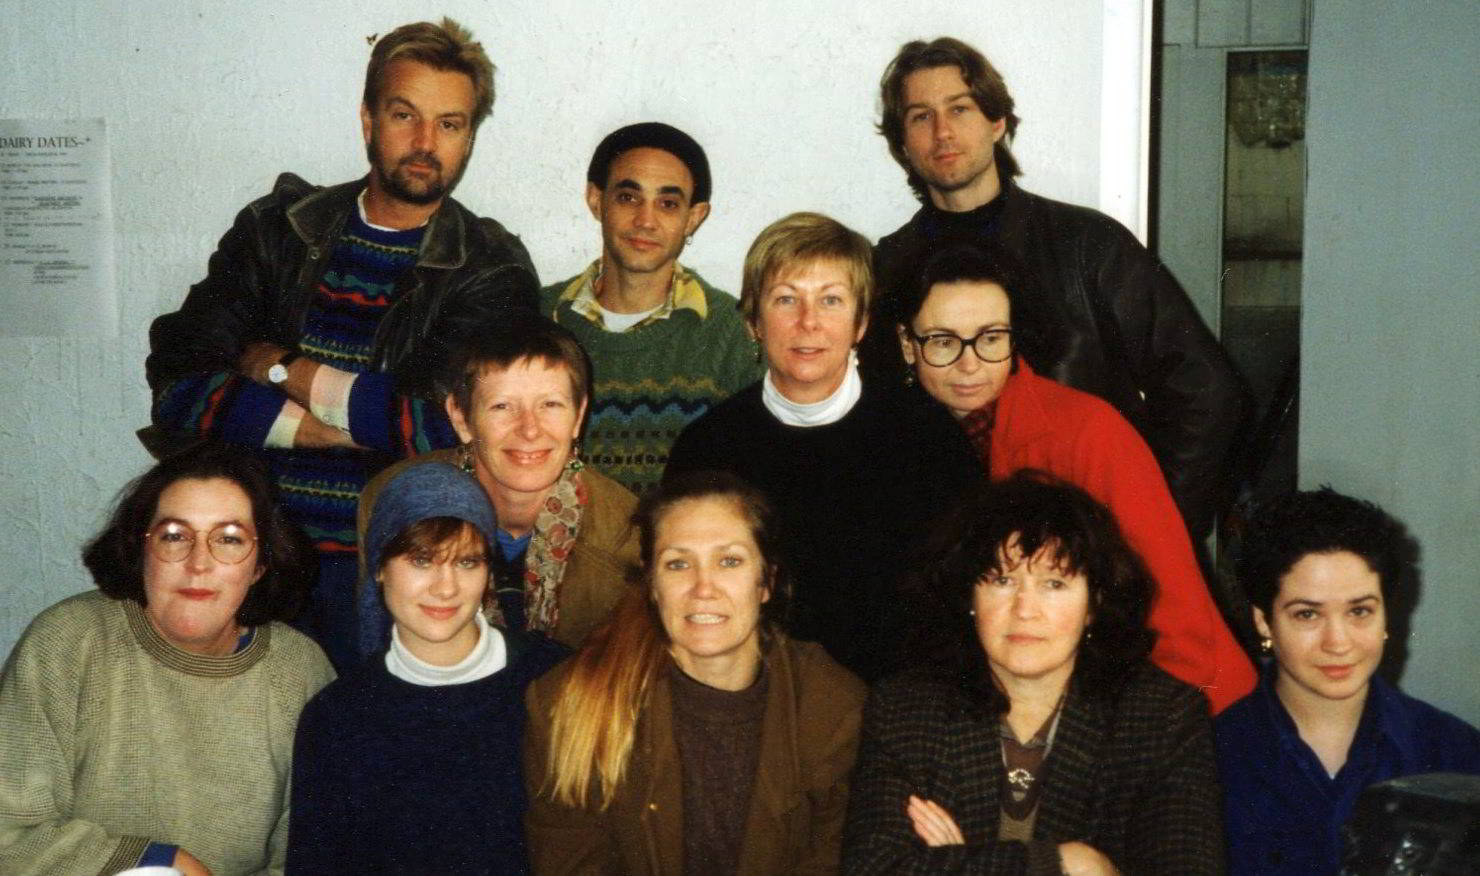 Handspan Theatre Daze of Our Lives group photo of eleven people in winter clothes